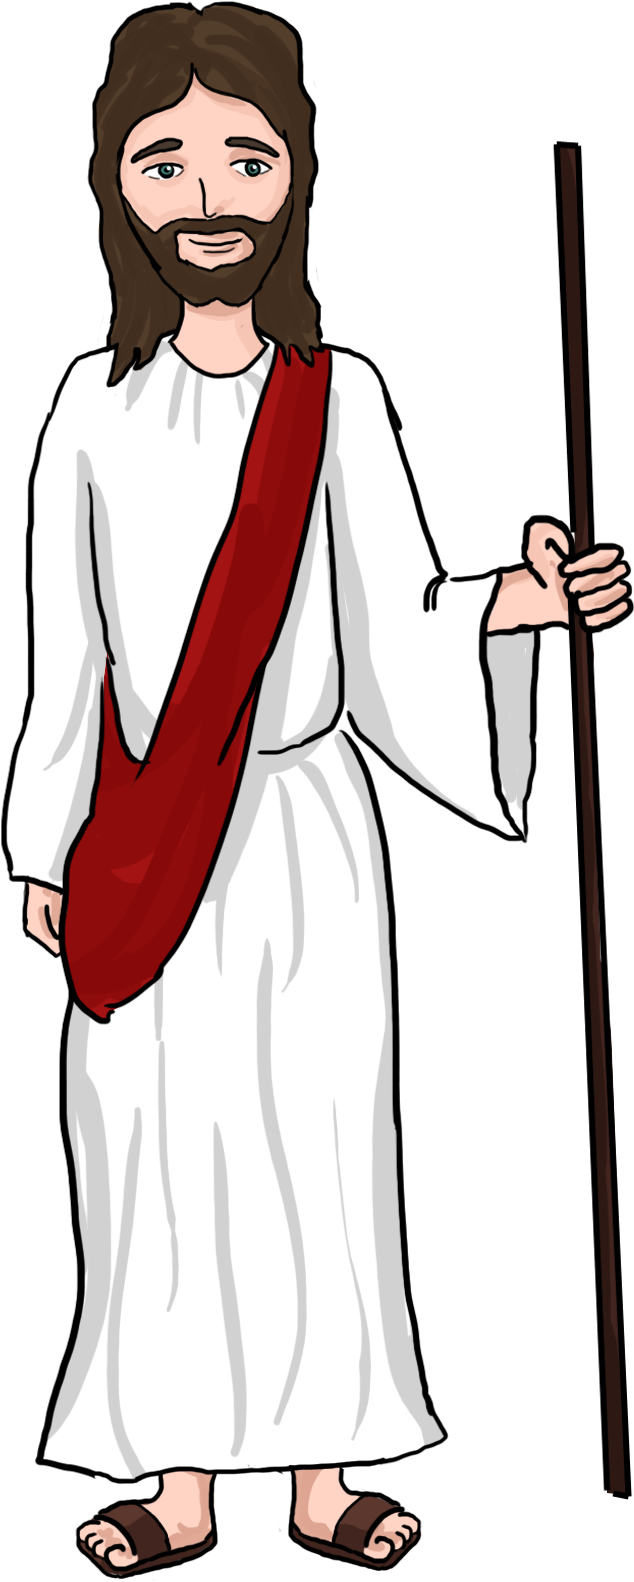 A Cartoon Of A Man Wearing A White Robe And A Red Scarf